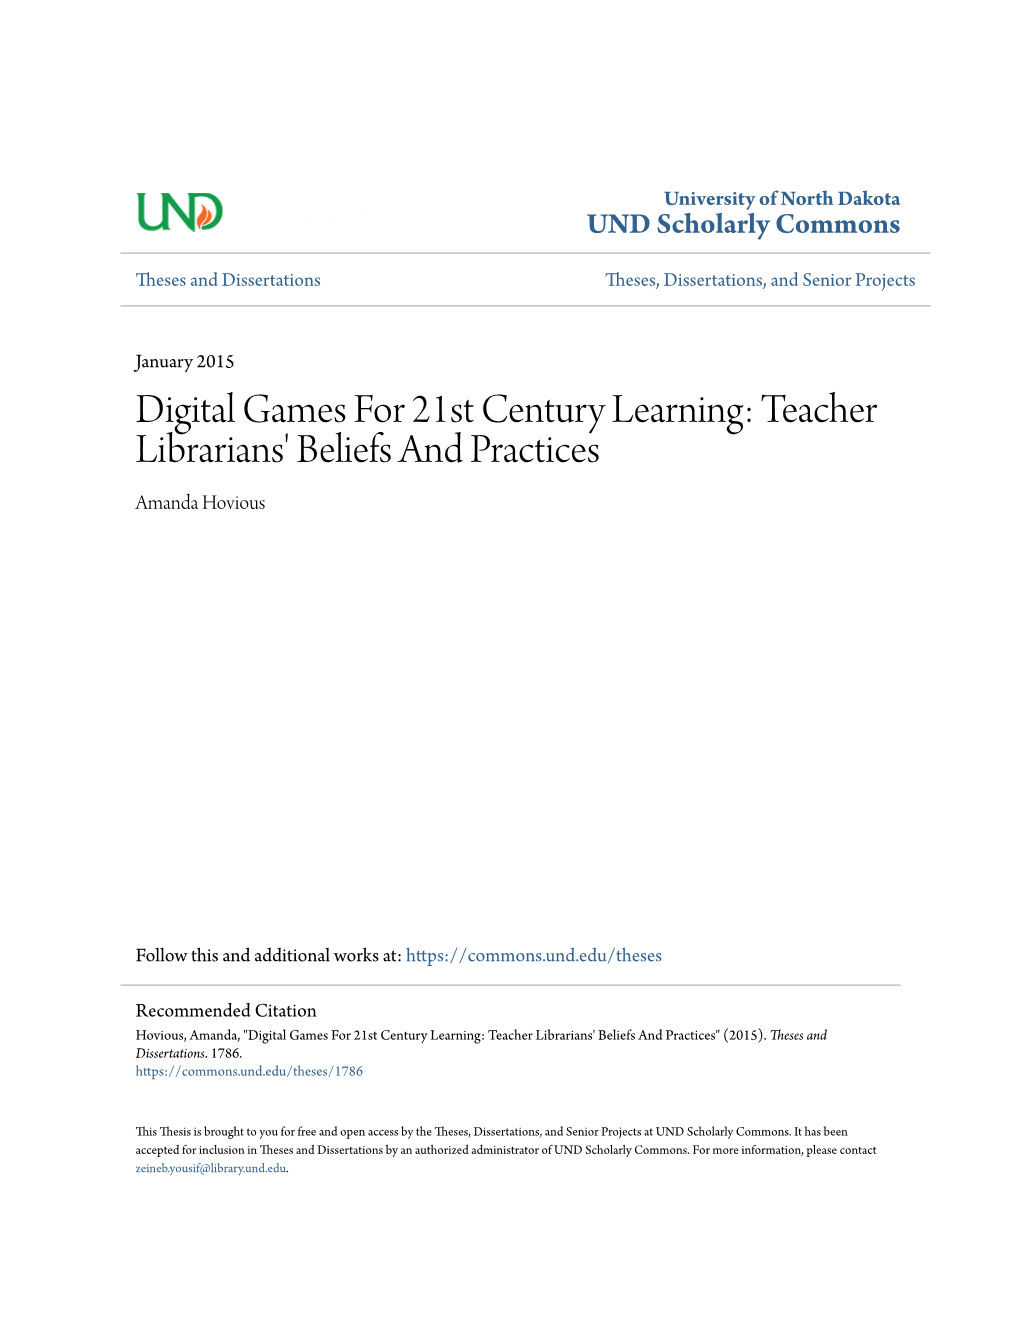 Digital Games for 21St Century Learning: Teacher Librarians' Beliefs and Practices Amanda Hovious